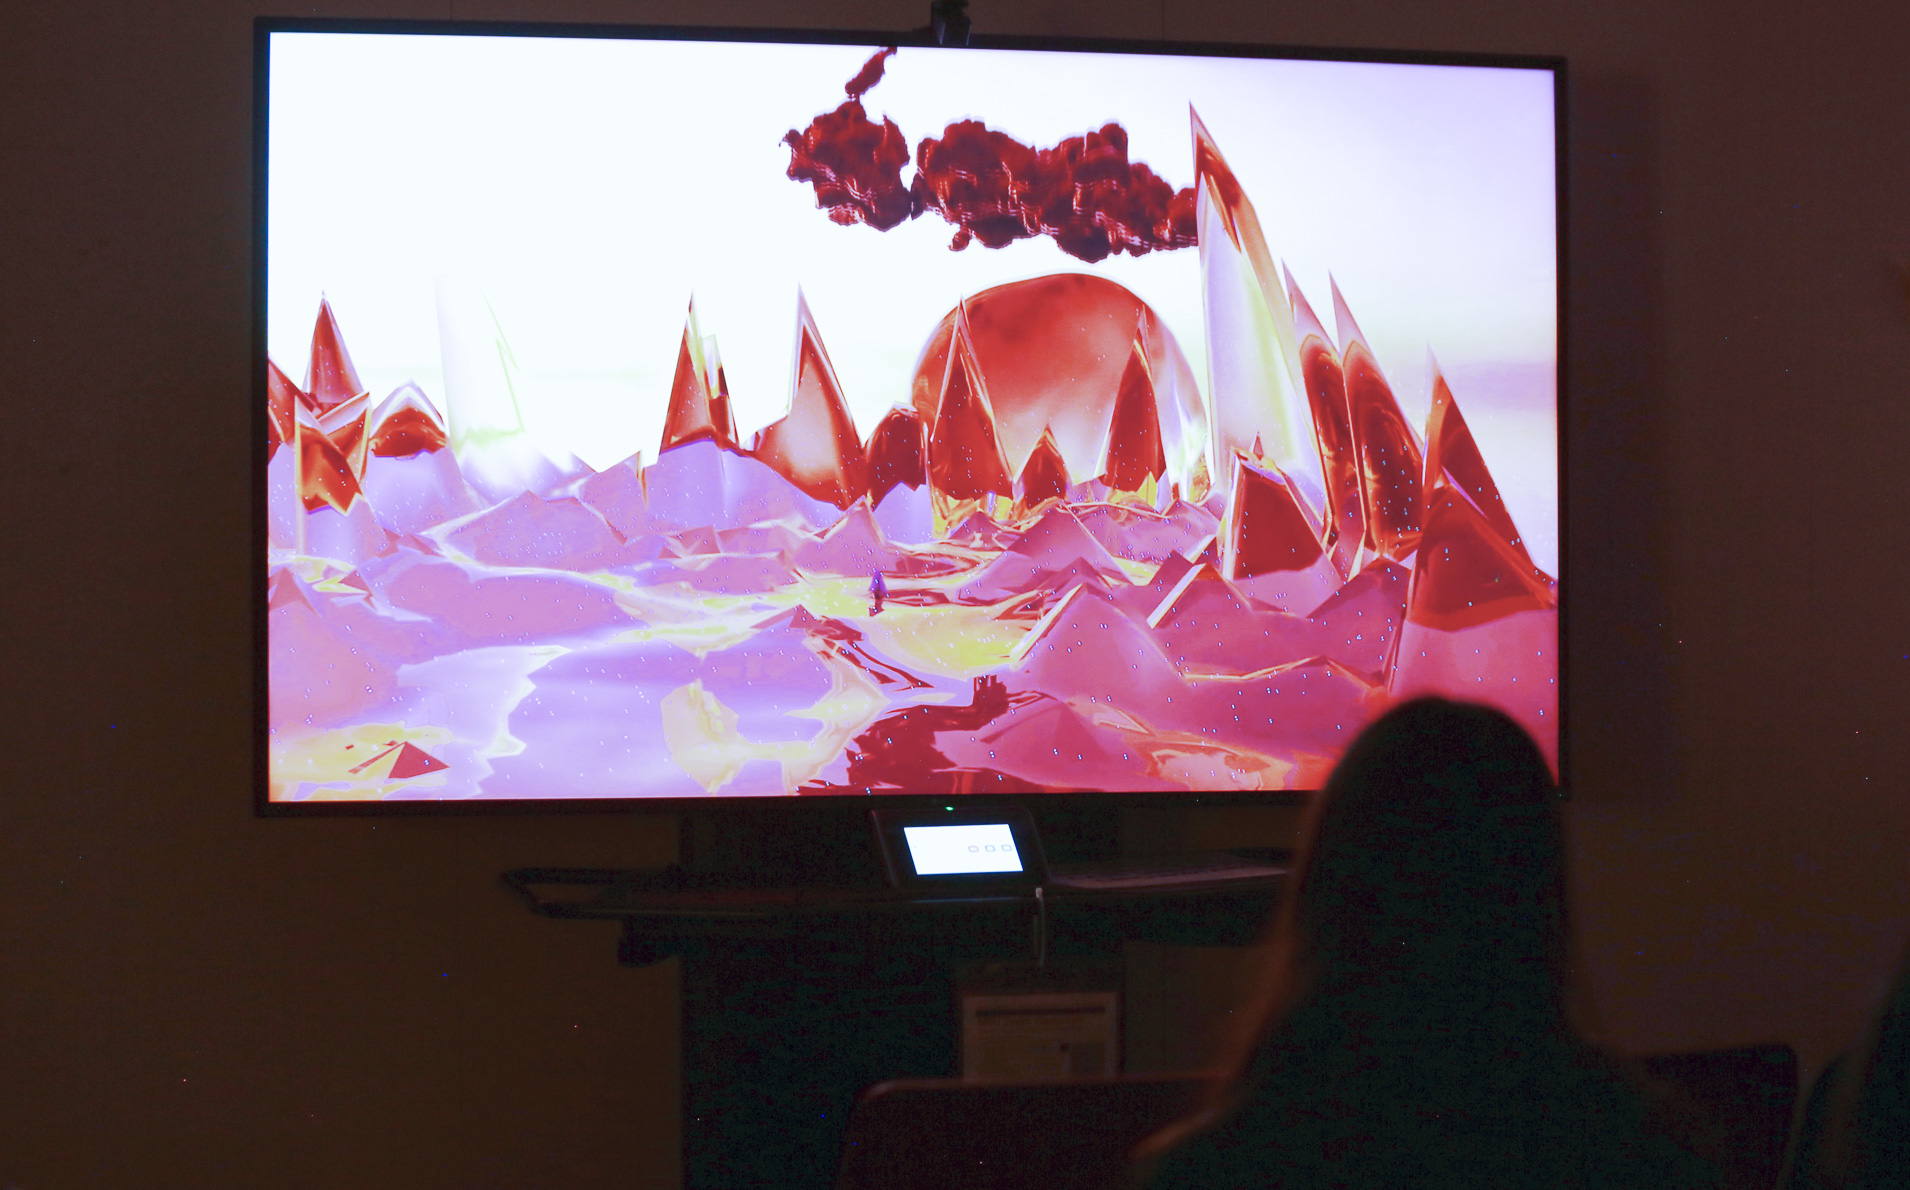 A television screen in a darkened room showing a digitally generated landscape